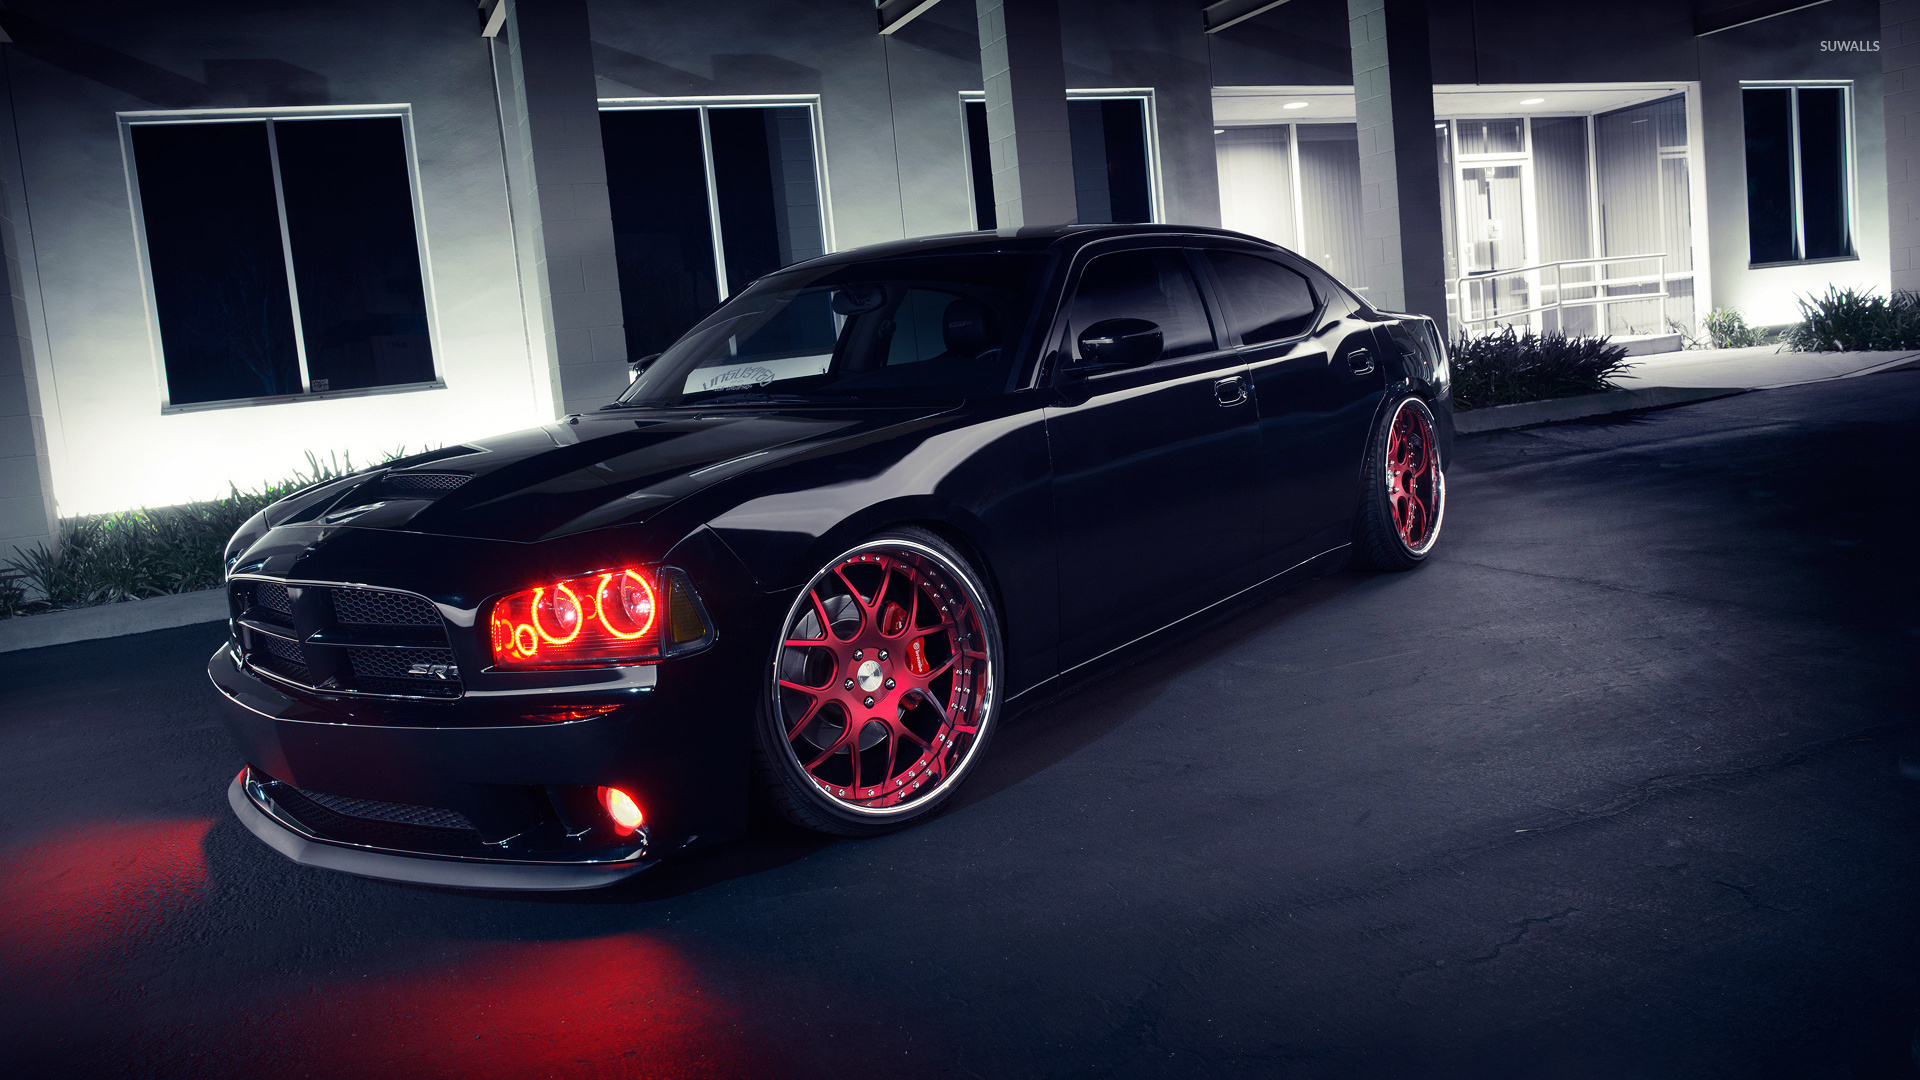 Dodge Charger [3] wallpaper - Car wallpapers - #45027